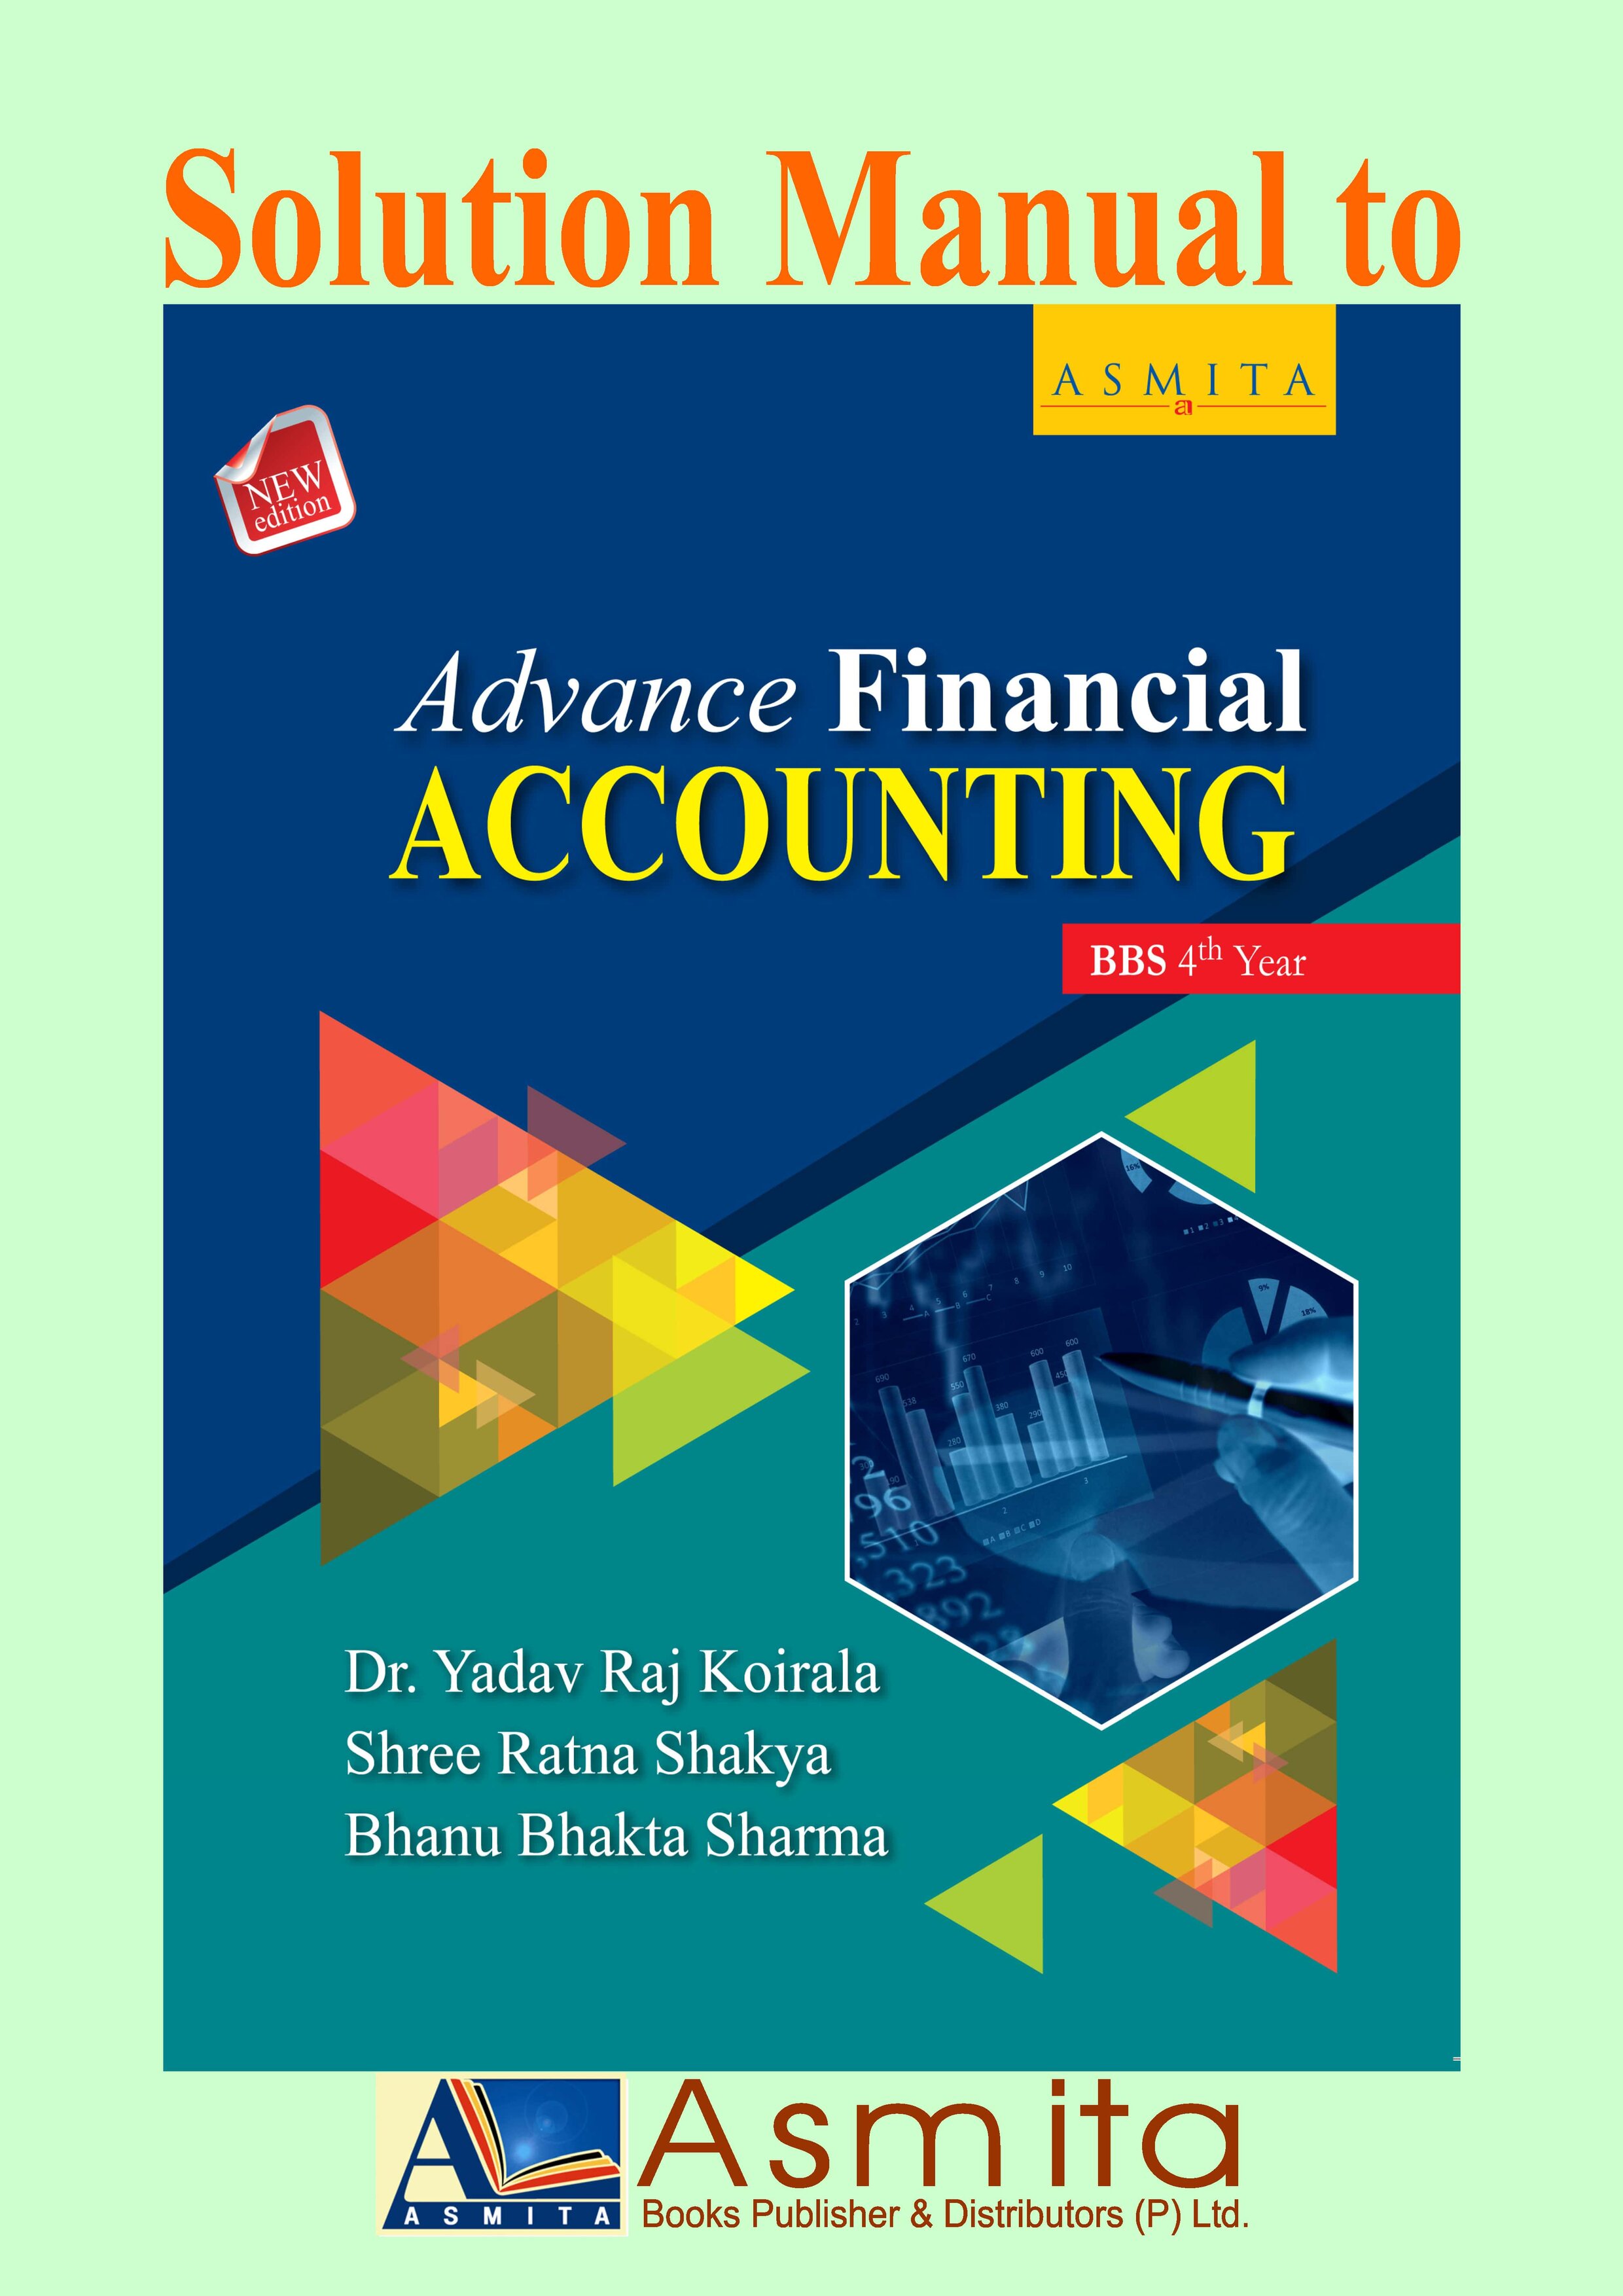 Solution Manual to Advance Financial Accounting-BBS 4th Year